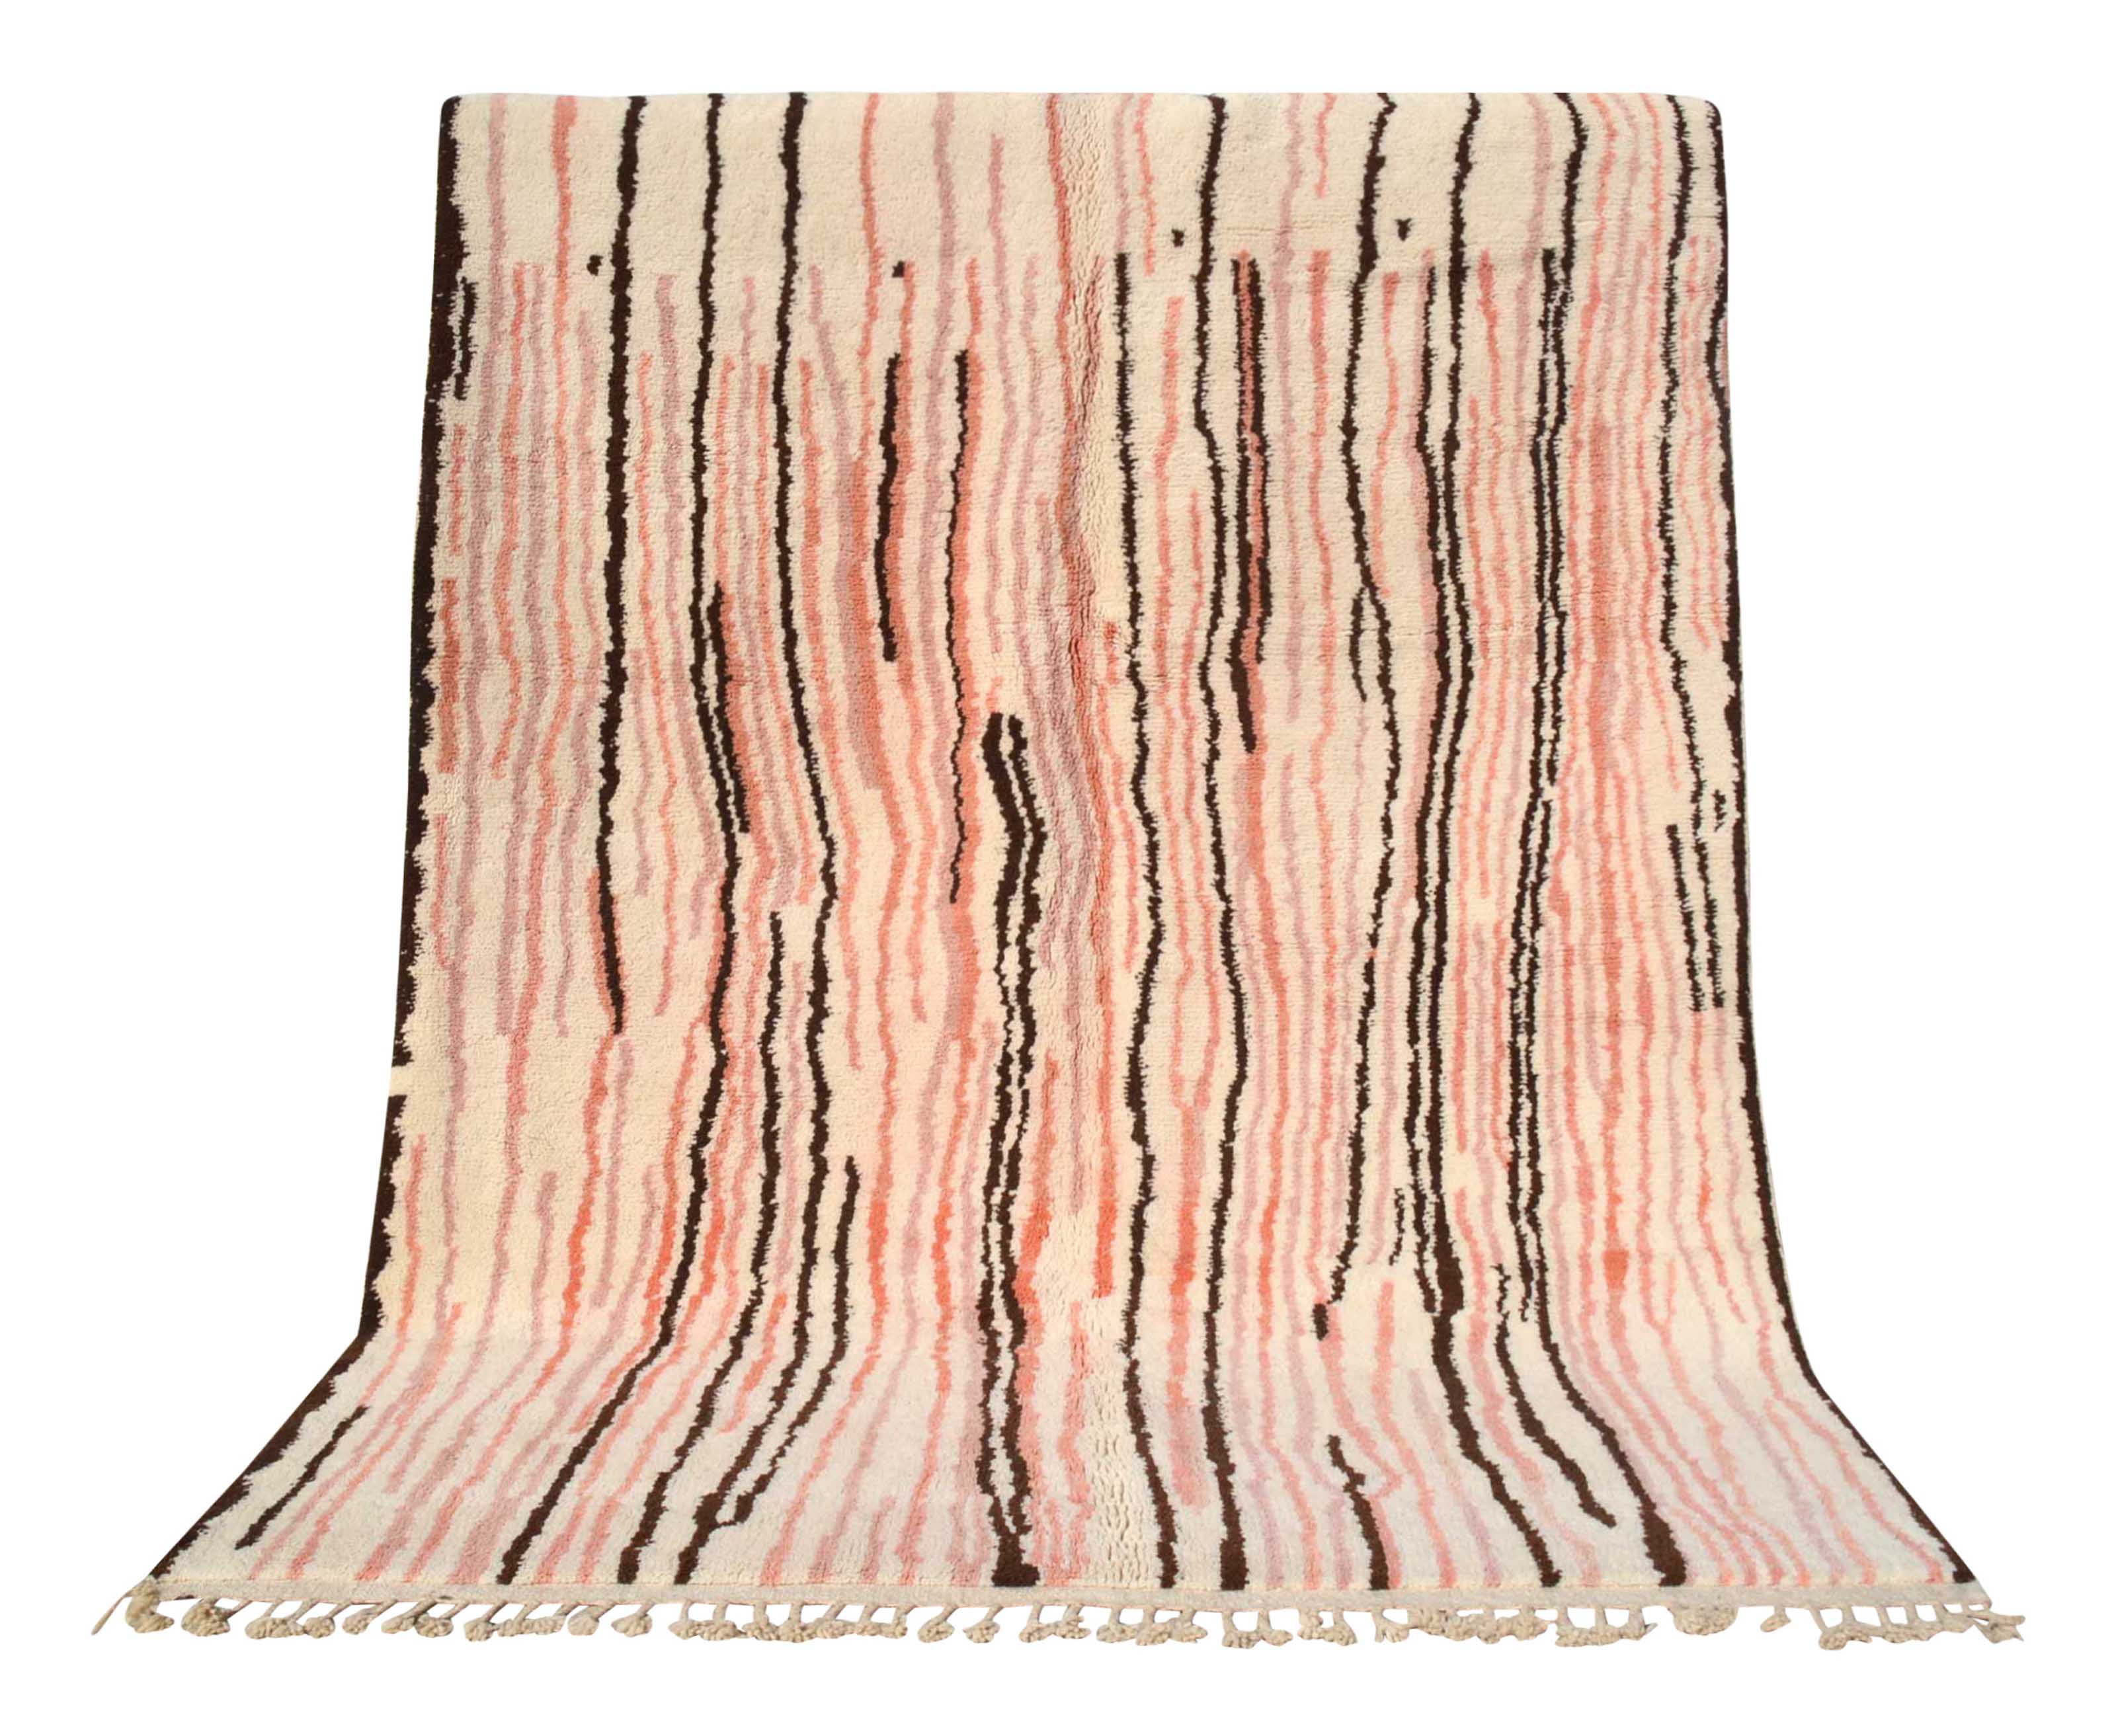 PinkLuxe: Elegant Handmade Pink Rug Collection | Illuminate Collective